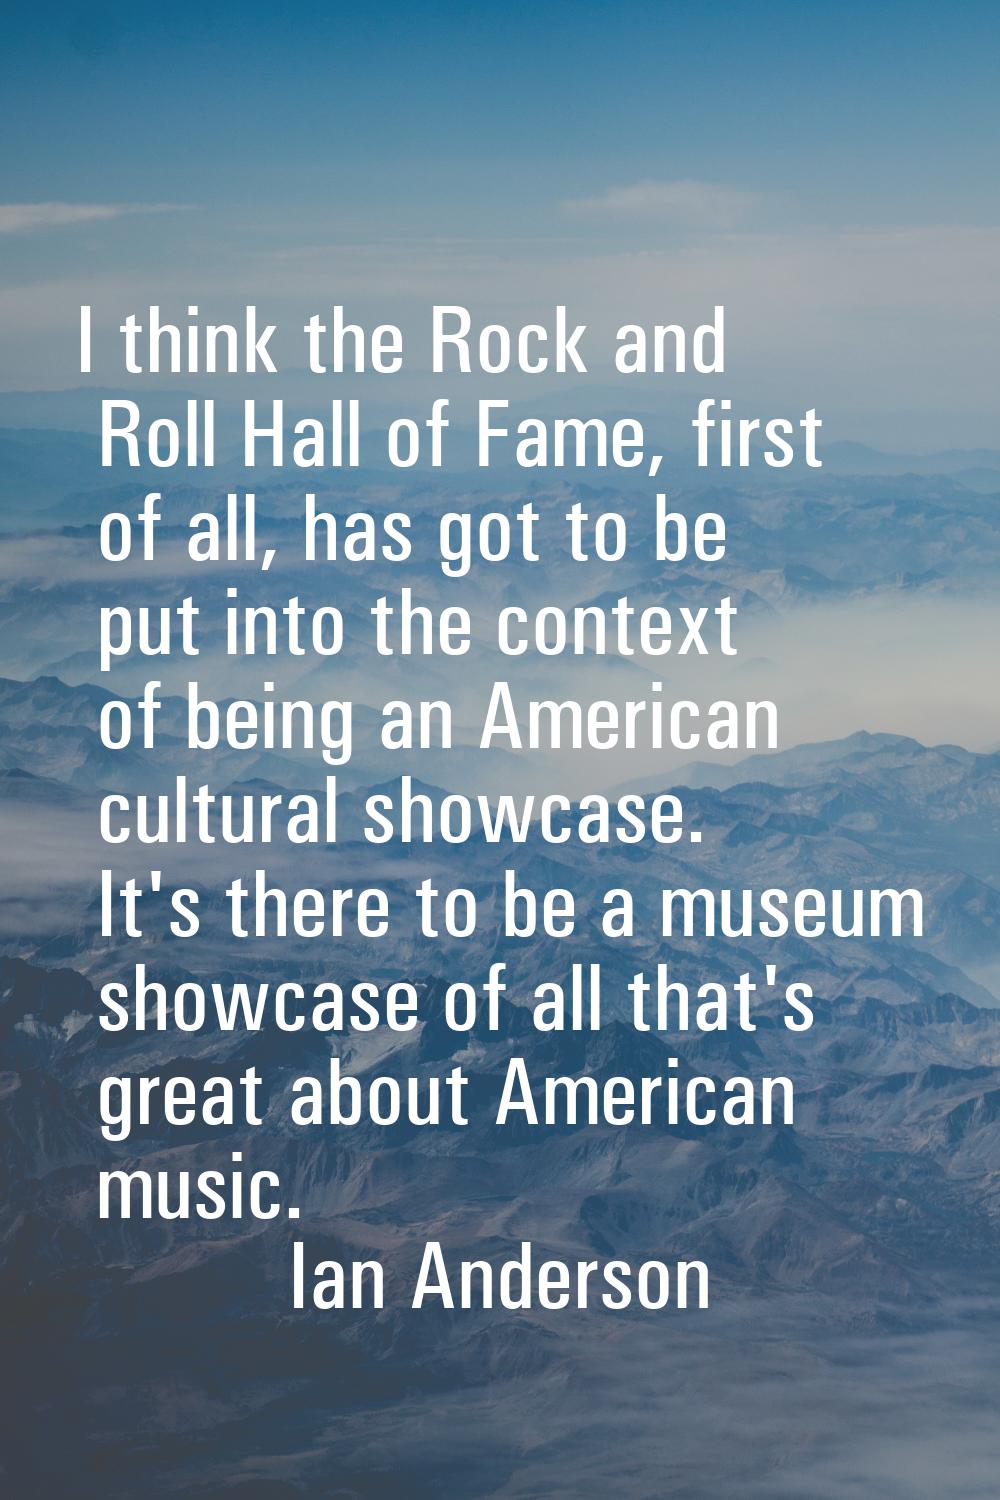 I think the Rock and Roll Hall of Fame, first of all, has got to be put into the context of being a